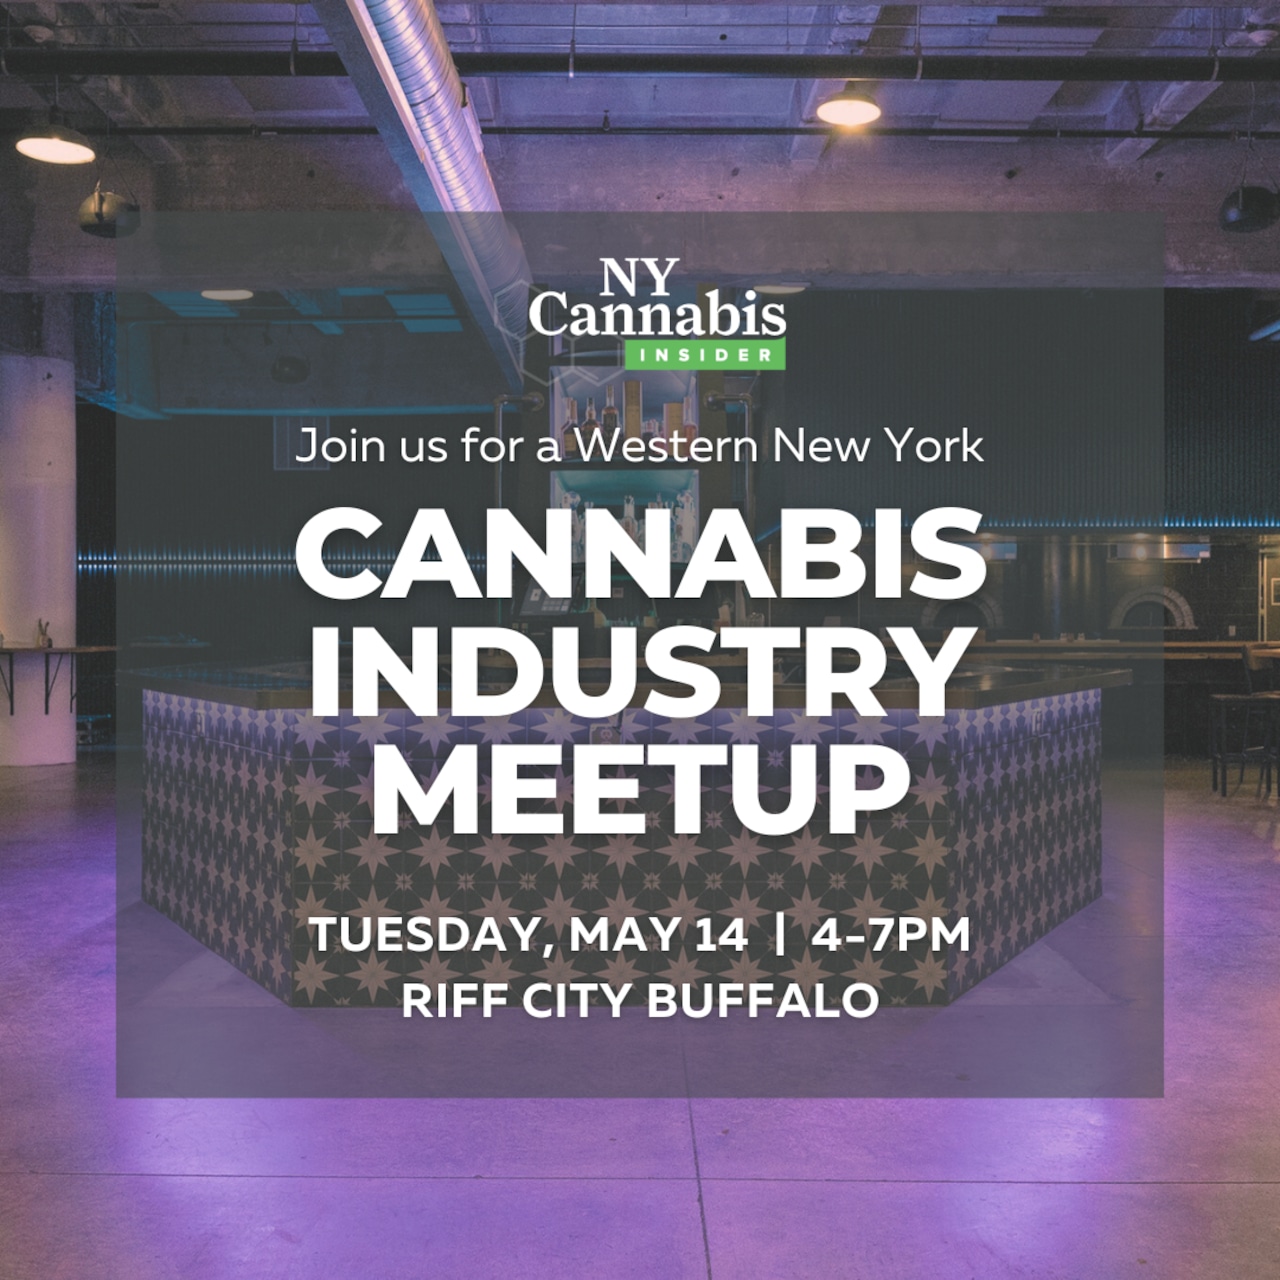 Interactive state of the state of the cannabis industry event being held in Buffalo [Video]